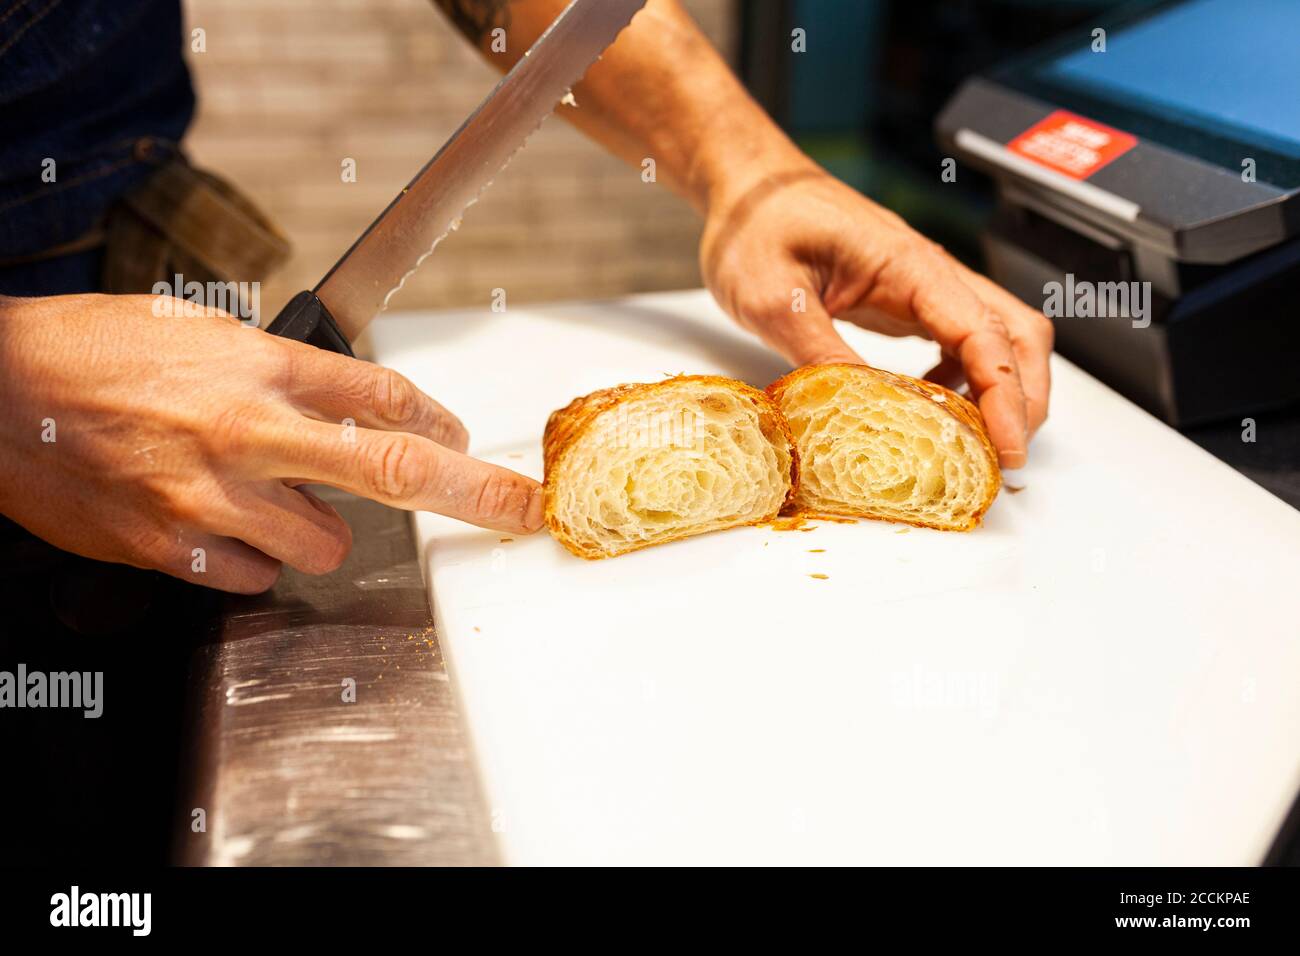 Baker cutting bread over kitchen counter at bakery Stock Photo